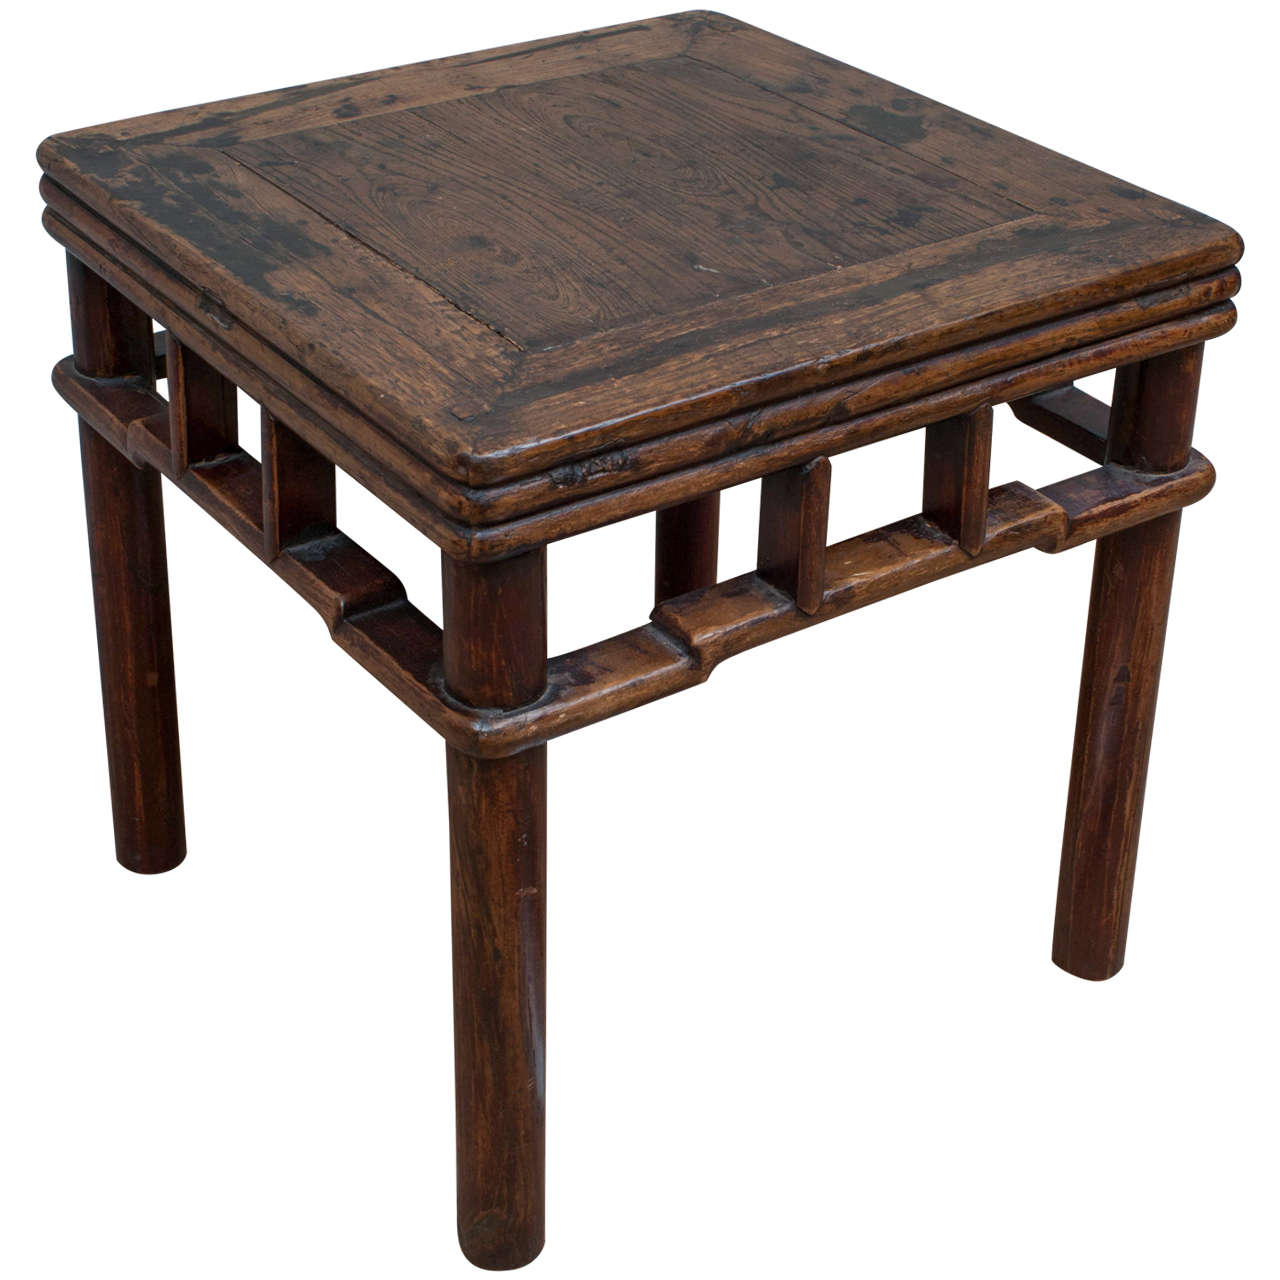 Chinese Low Table